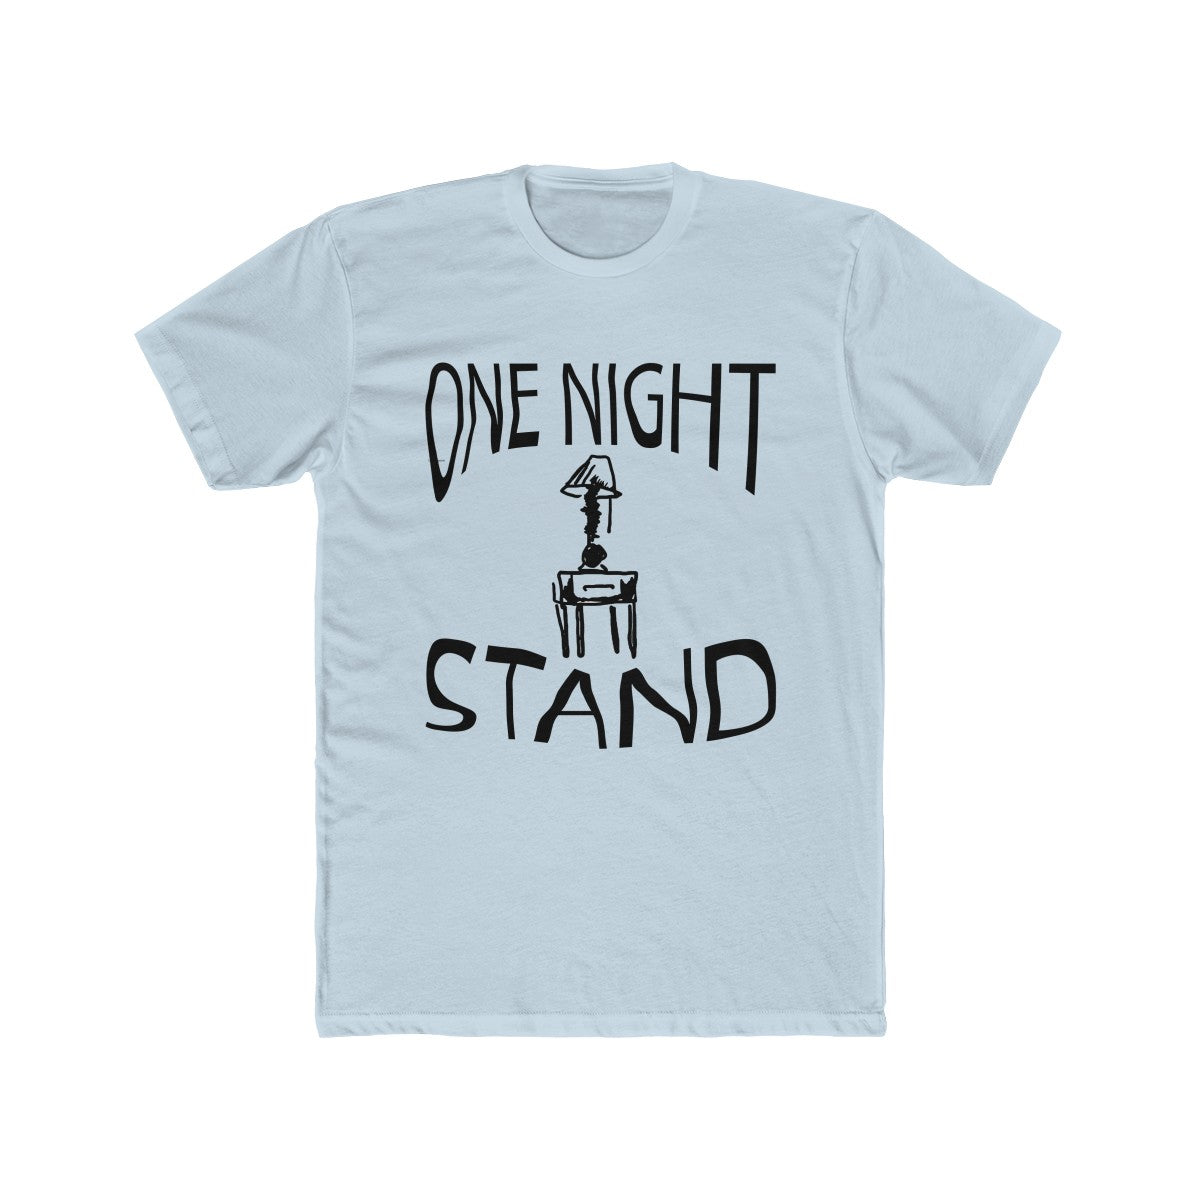 One Night Stand Funny Tee Shirt